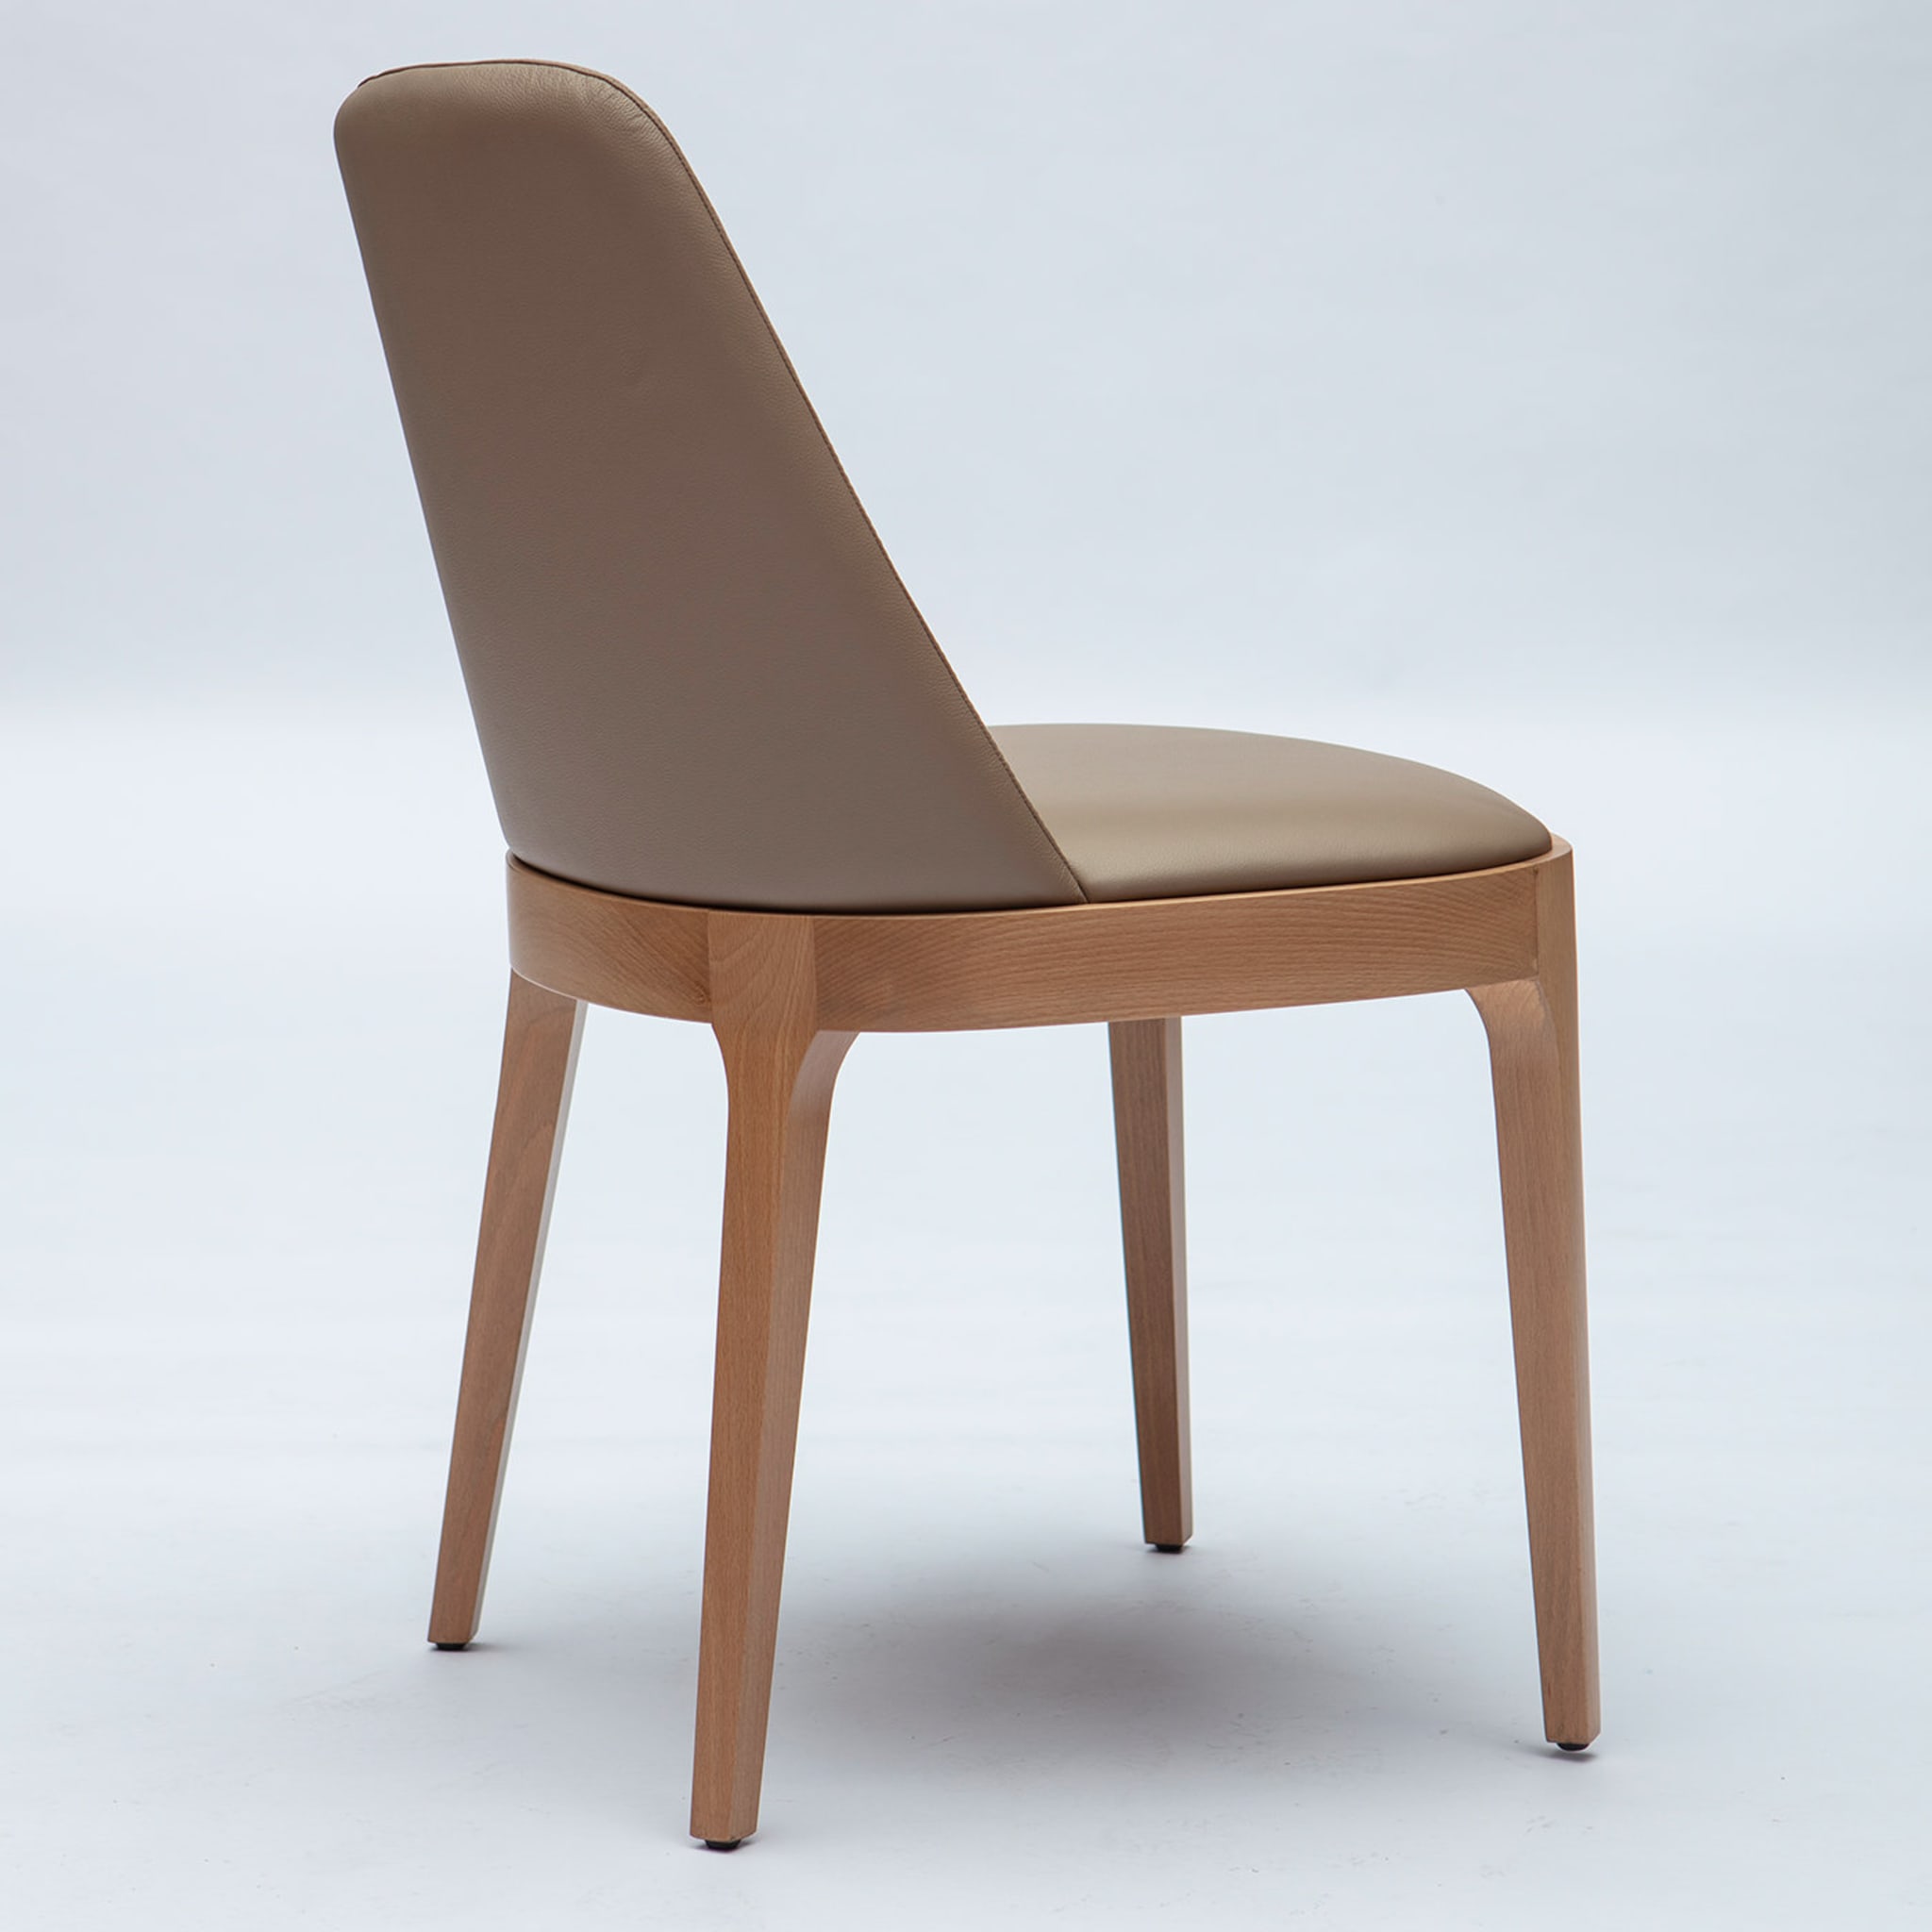 Club 24 leather dining chair - Alternative view 1